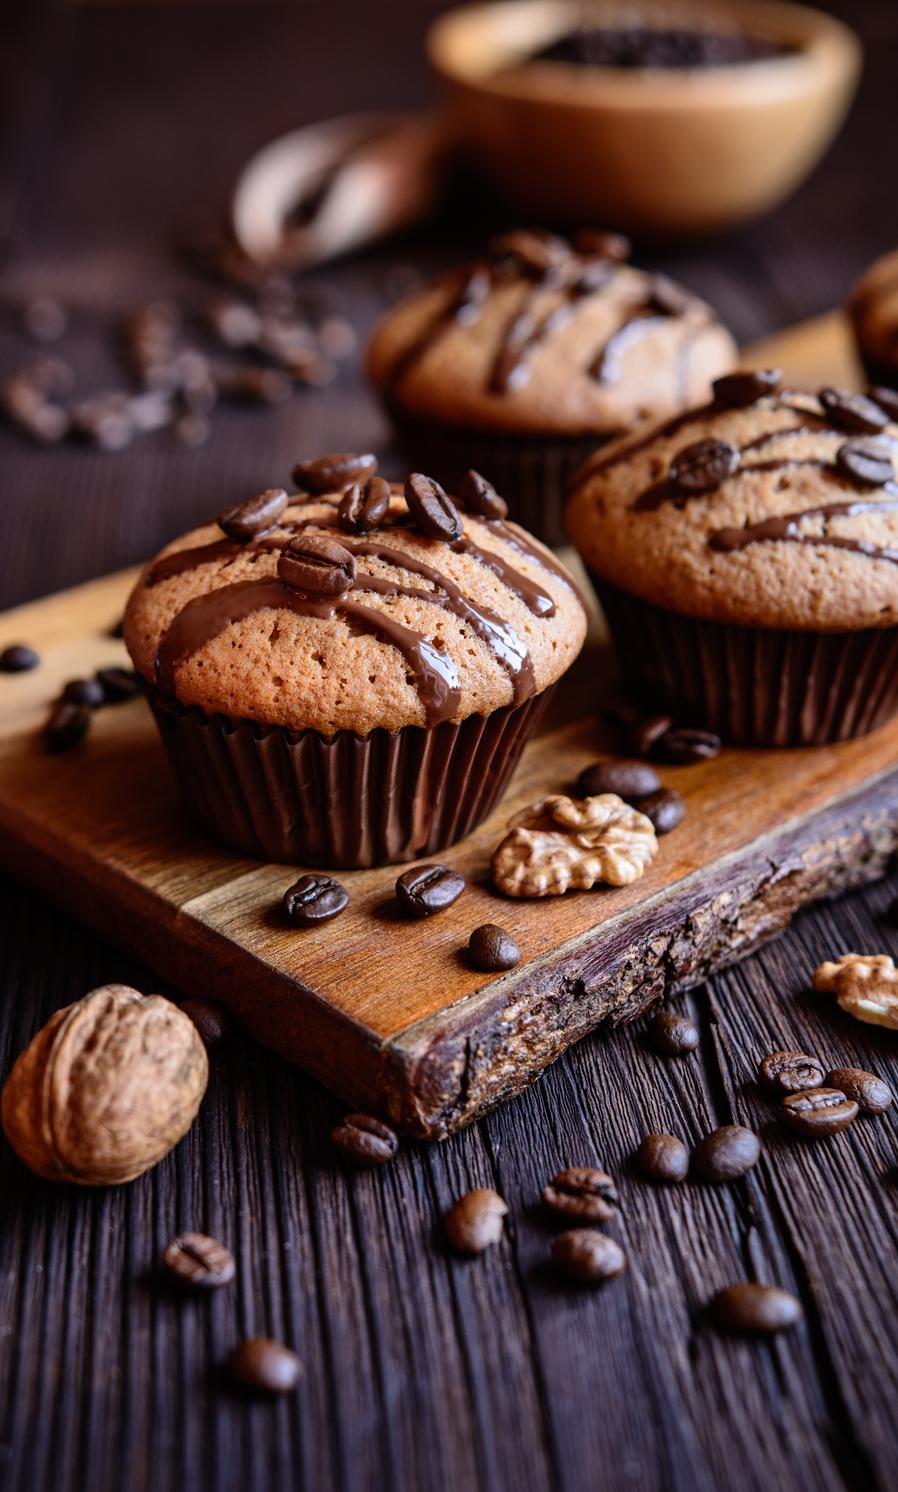  Nothing says cozy like freshly baked coffee muffins.